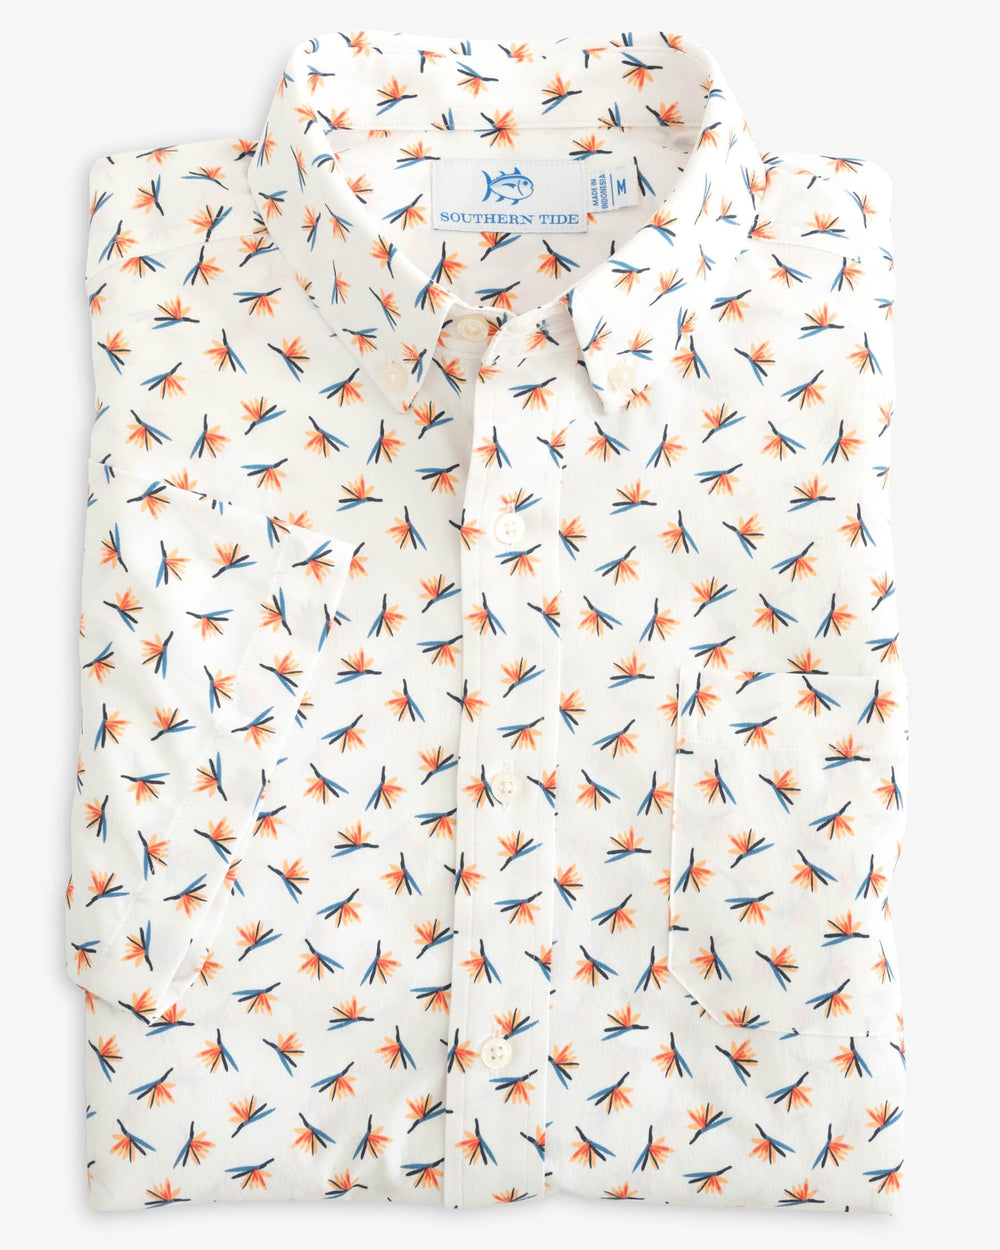 The folded view of the Southern Tide Paradise Park Printed Intercoastal Short Sleeve Button Down by Southern Tide - Classic White